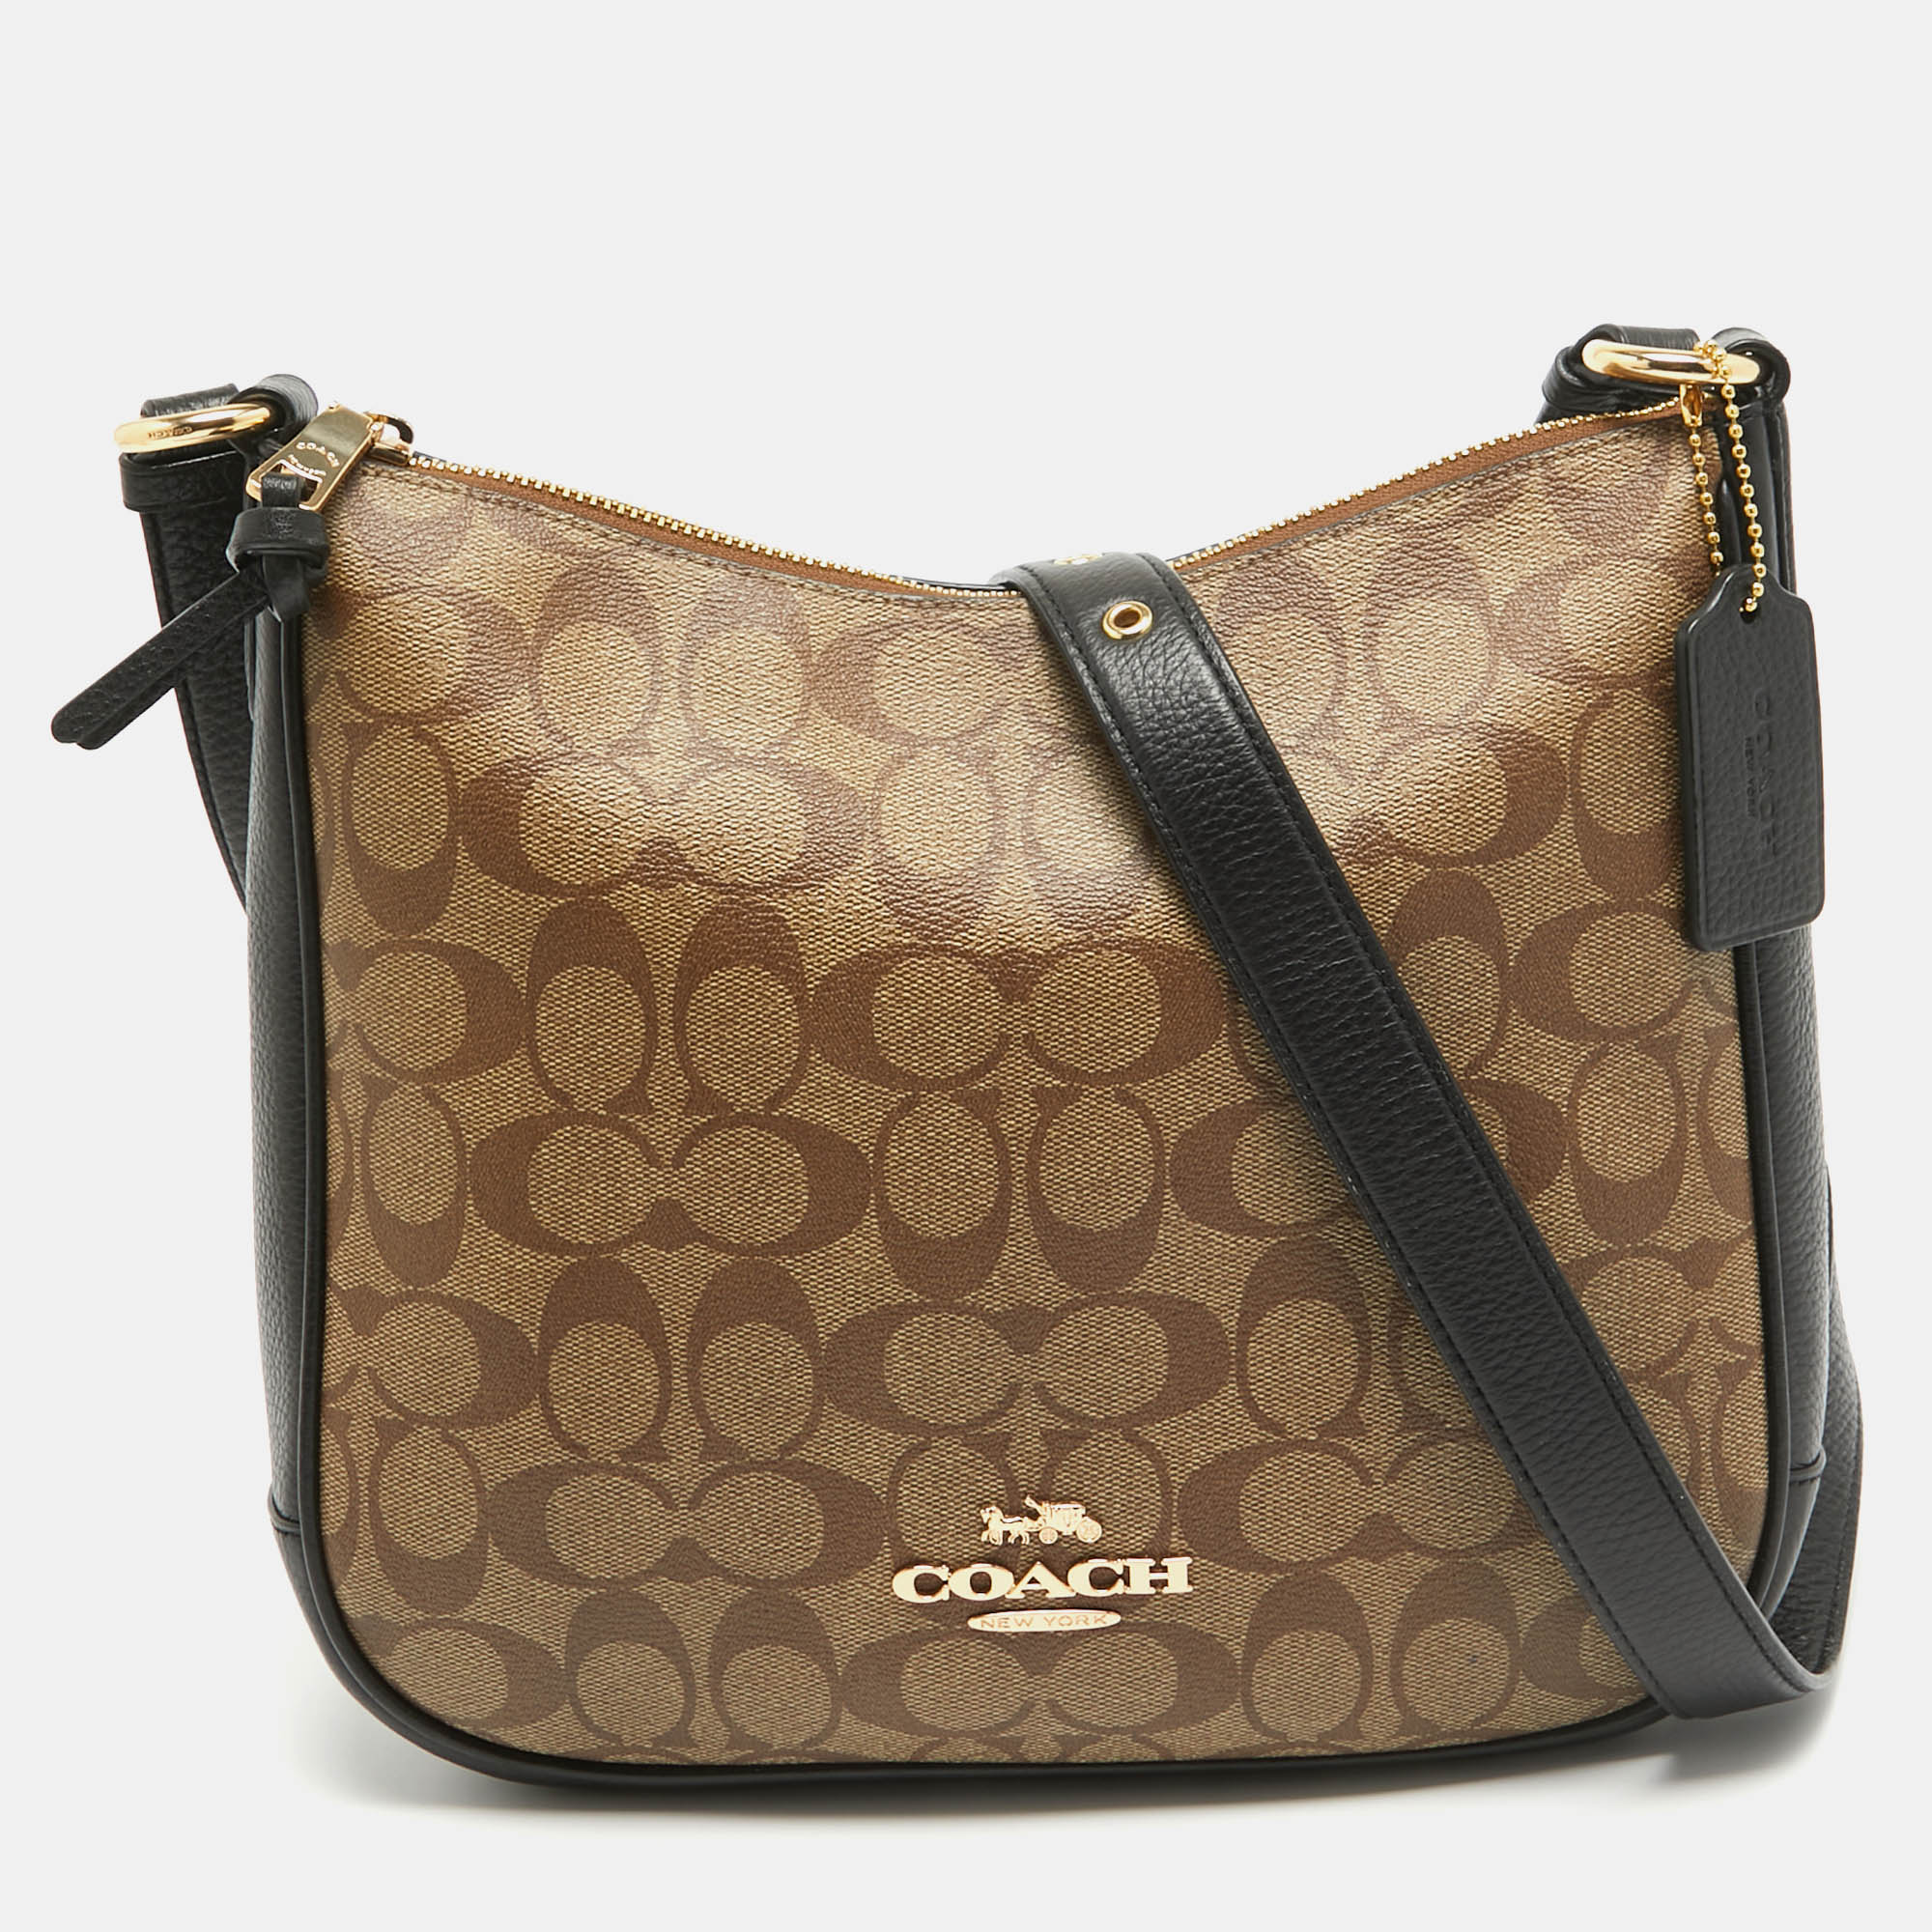 

Coach Beige/Black Signature Coated Canvas and Leather Ellie File Crossbody Bag